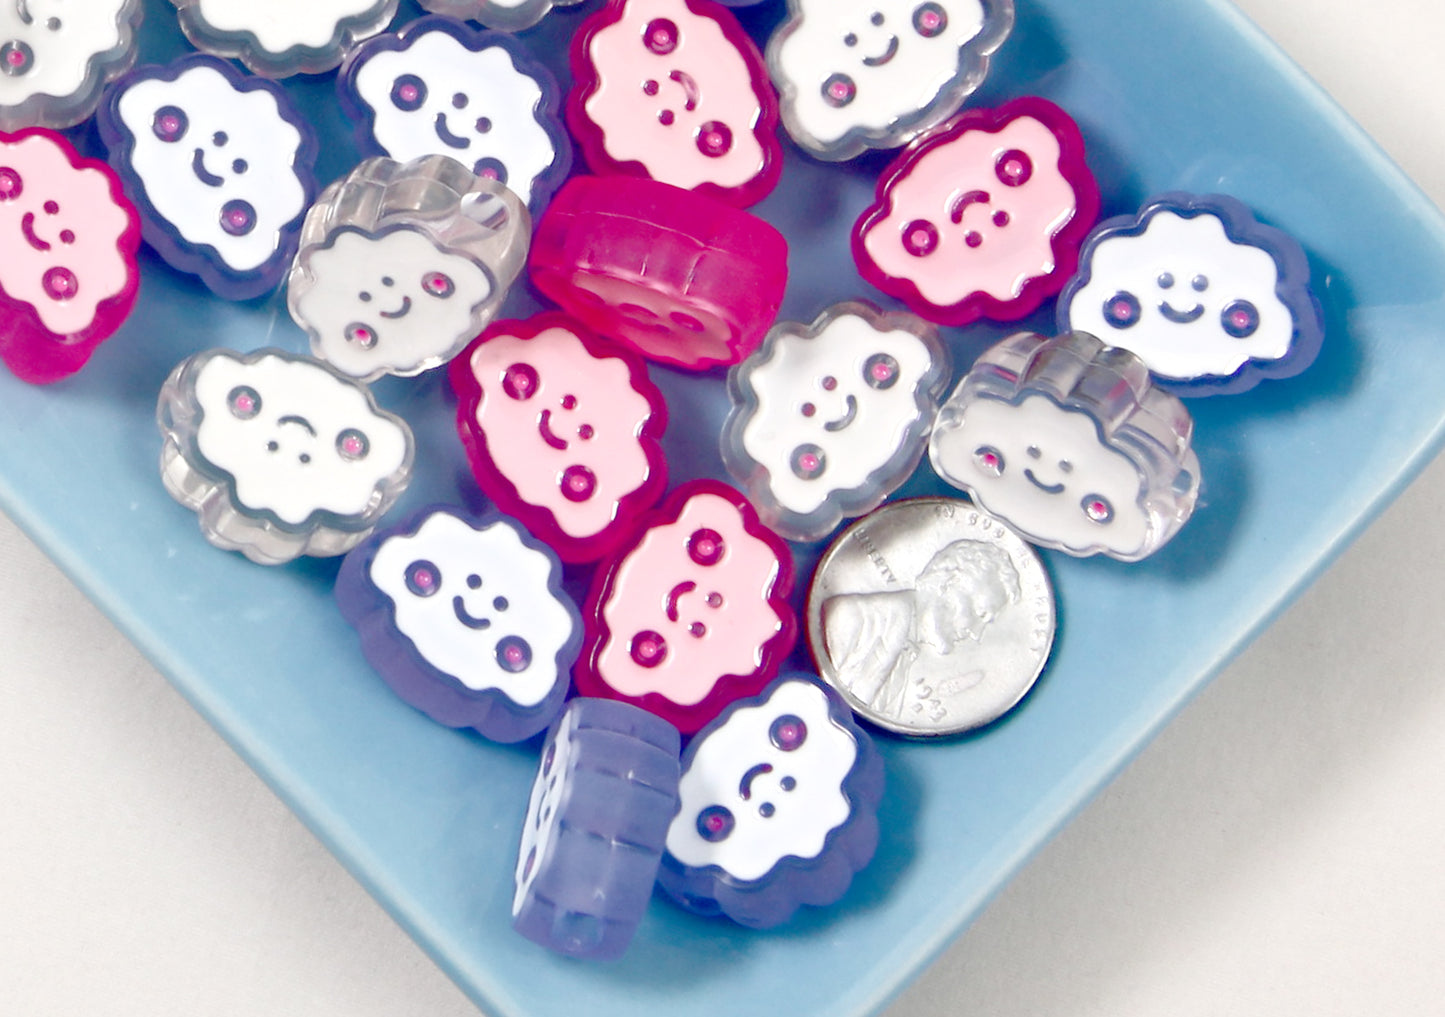 Pastel Cloud Beads - 20mm Cute Happy Clouds Enamel Style Acrylic Beads or Resin Beads - 9 pc set